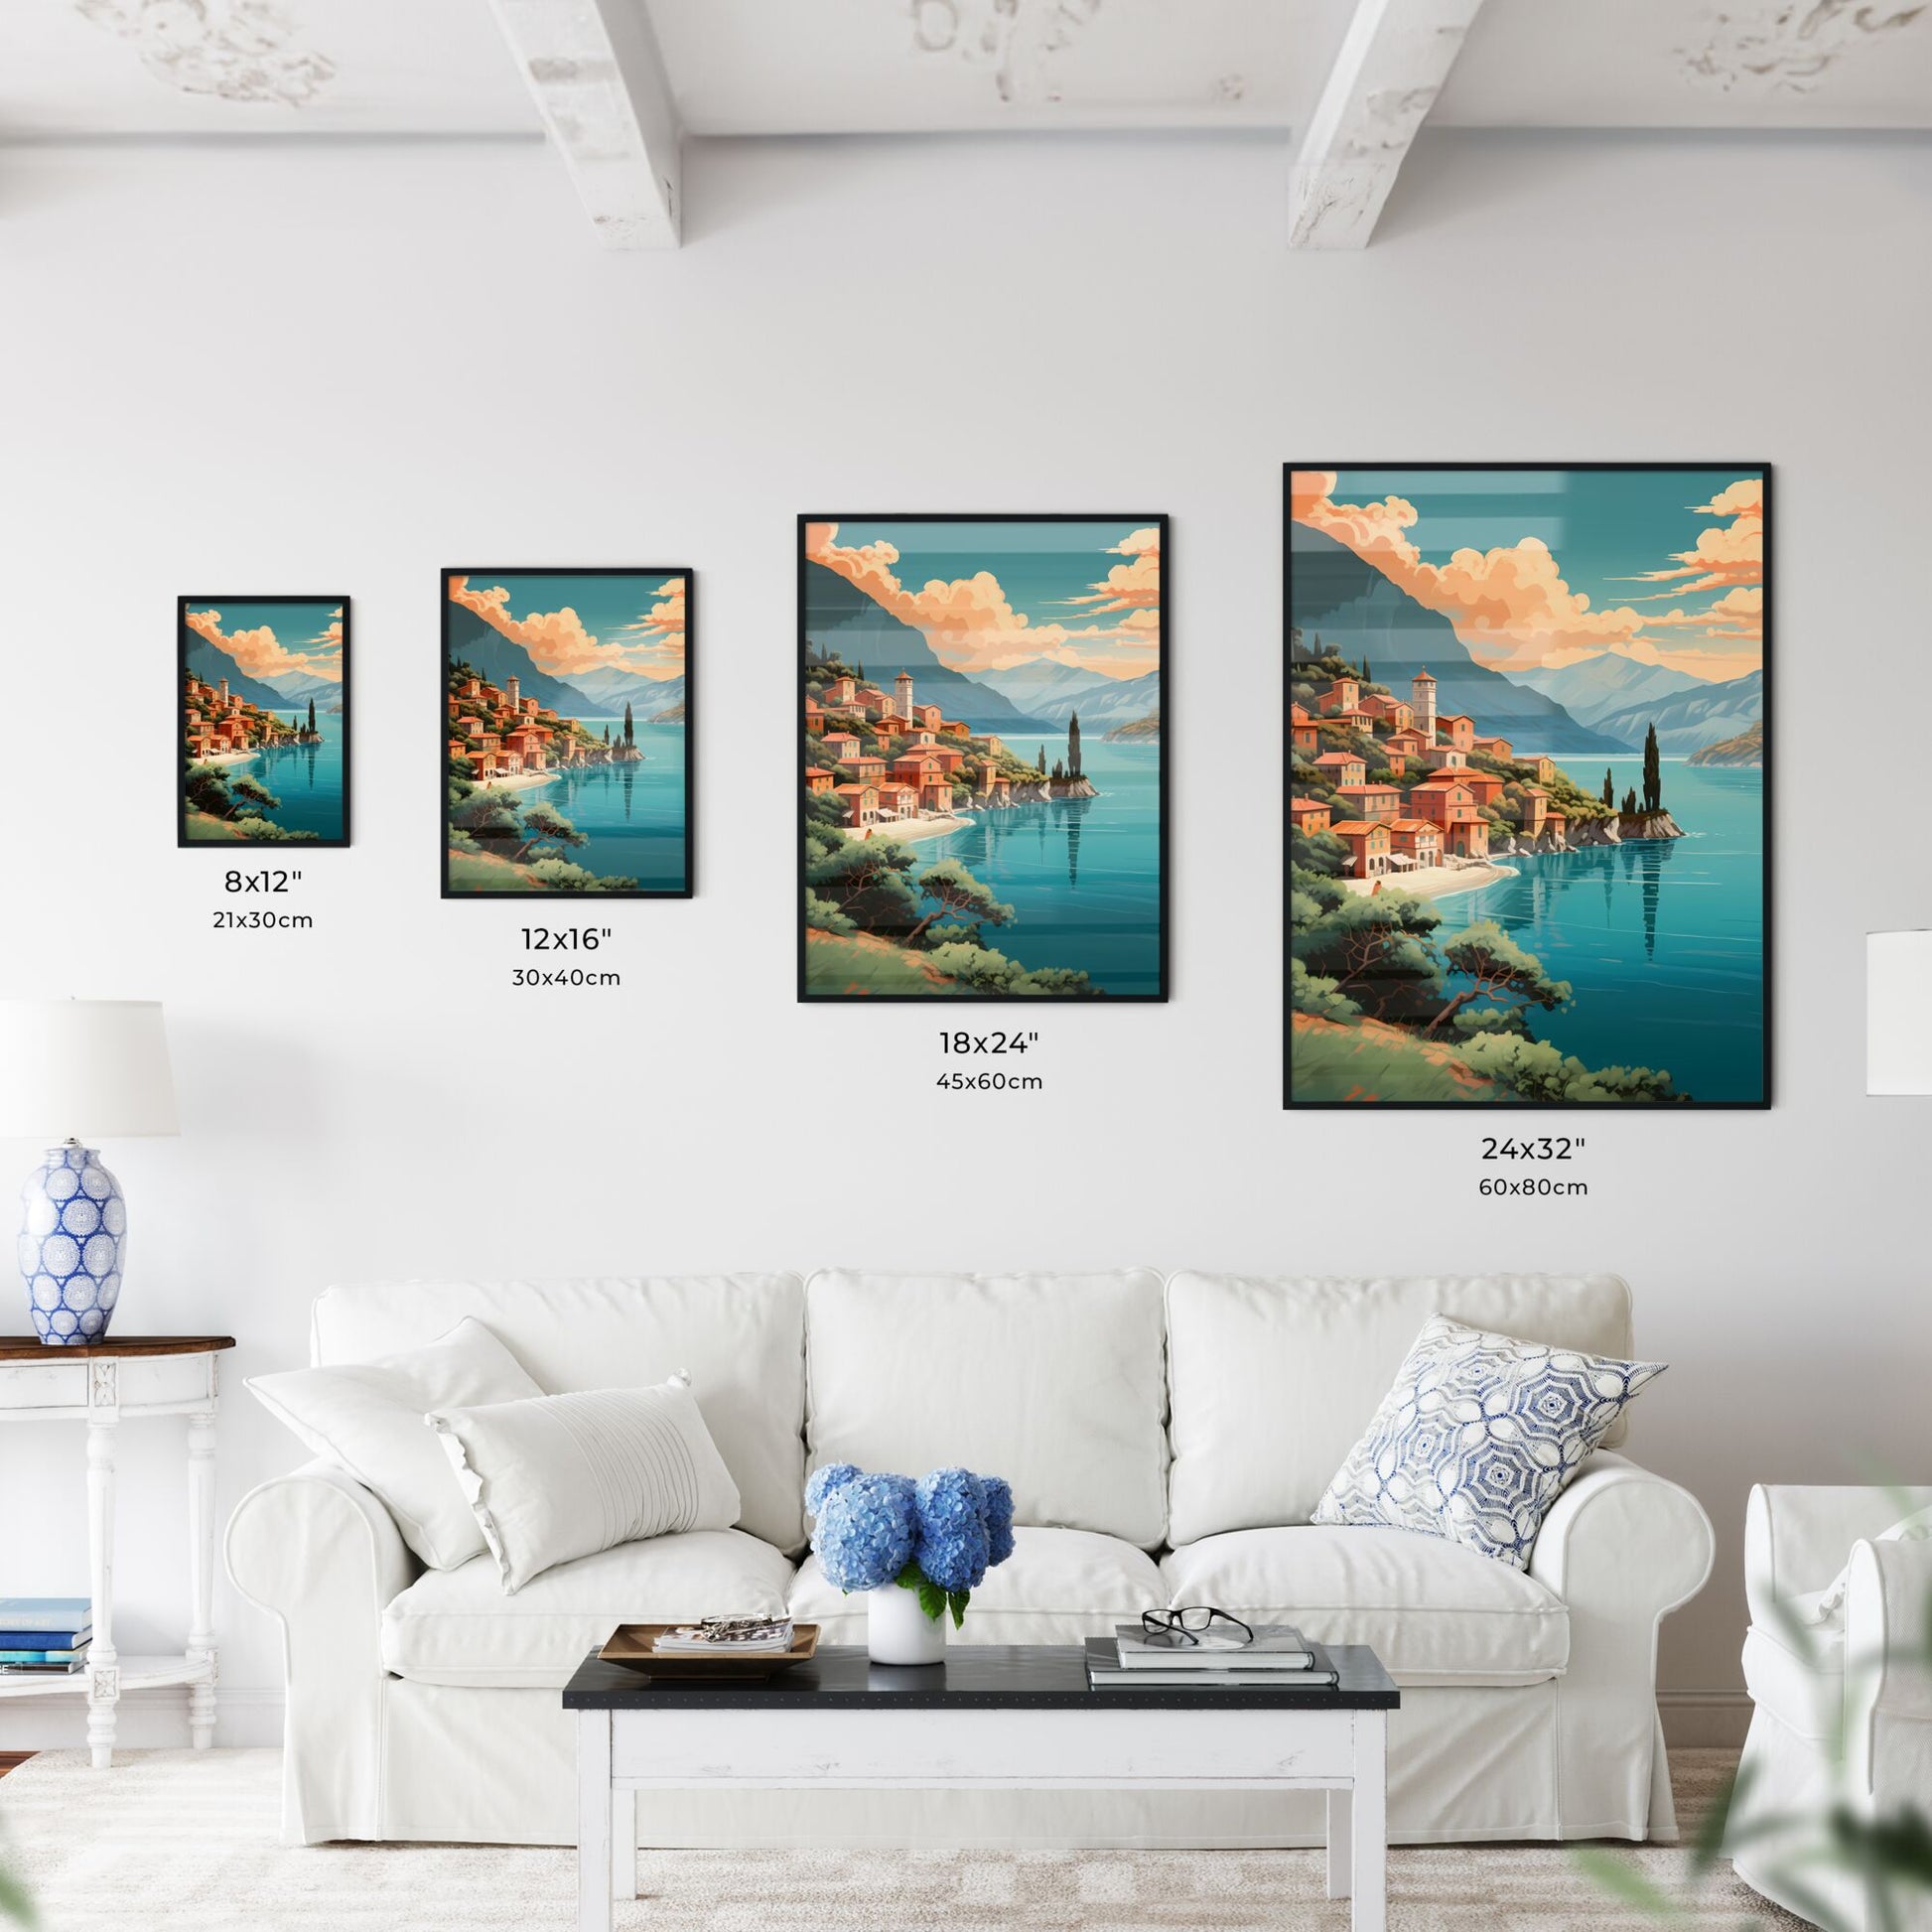 Painting Of A Town On A Hill By A Body Of Water Art Print Default Title